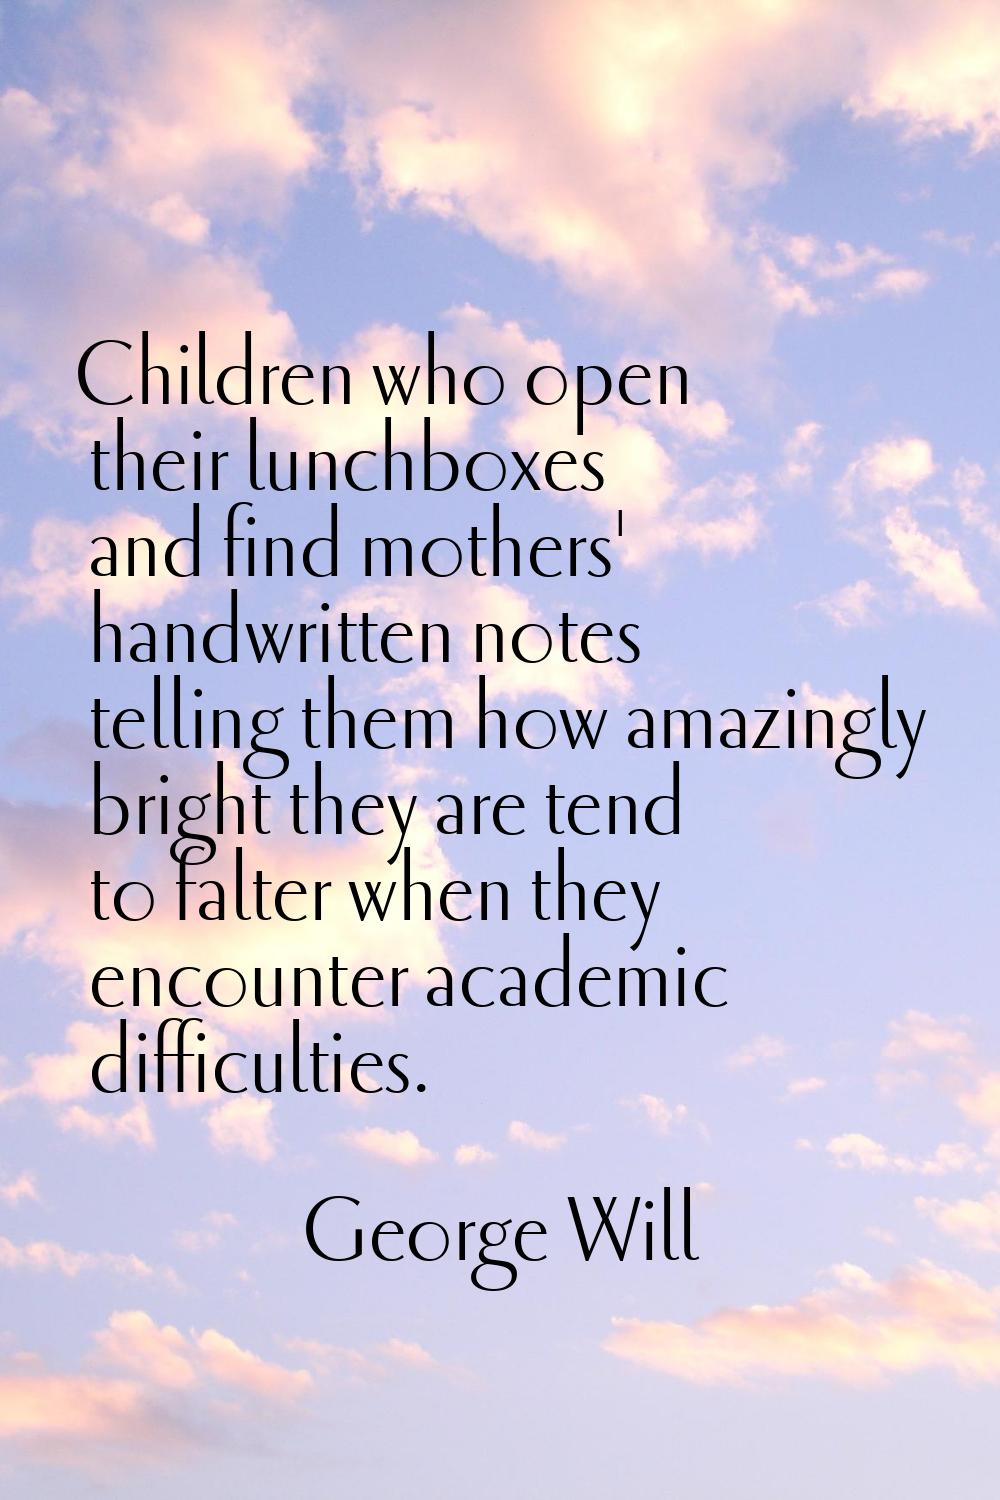 Children who open their lunchboxes and find mothers' handwritten notes telling them how amazingly b